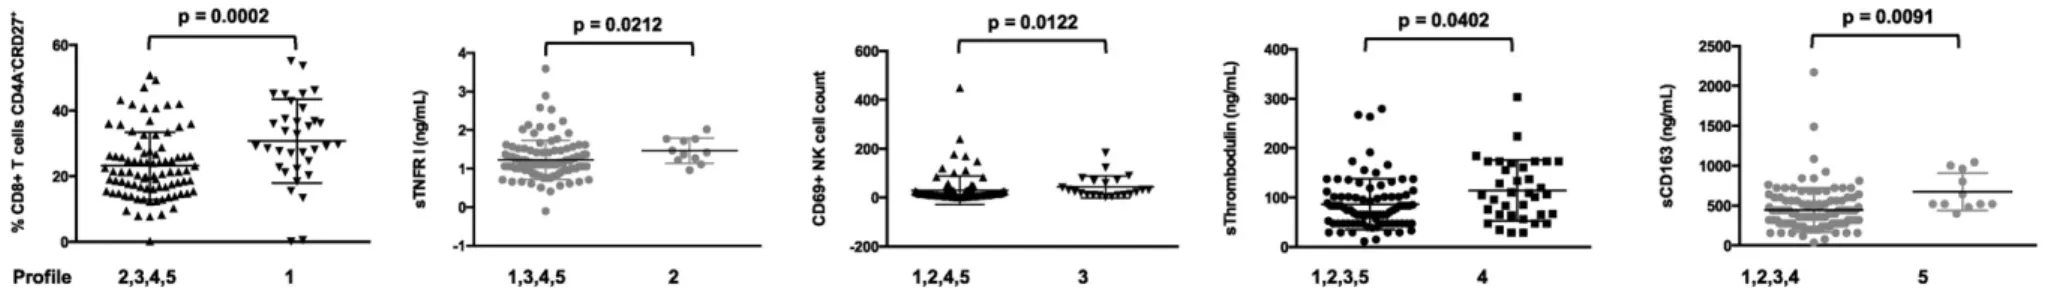 Fig. 4. Characterization of the ﬁve different immune activation proﬁles. Differences in the levels of key activation markers between each group of patients and the other groups are represented